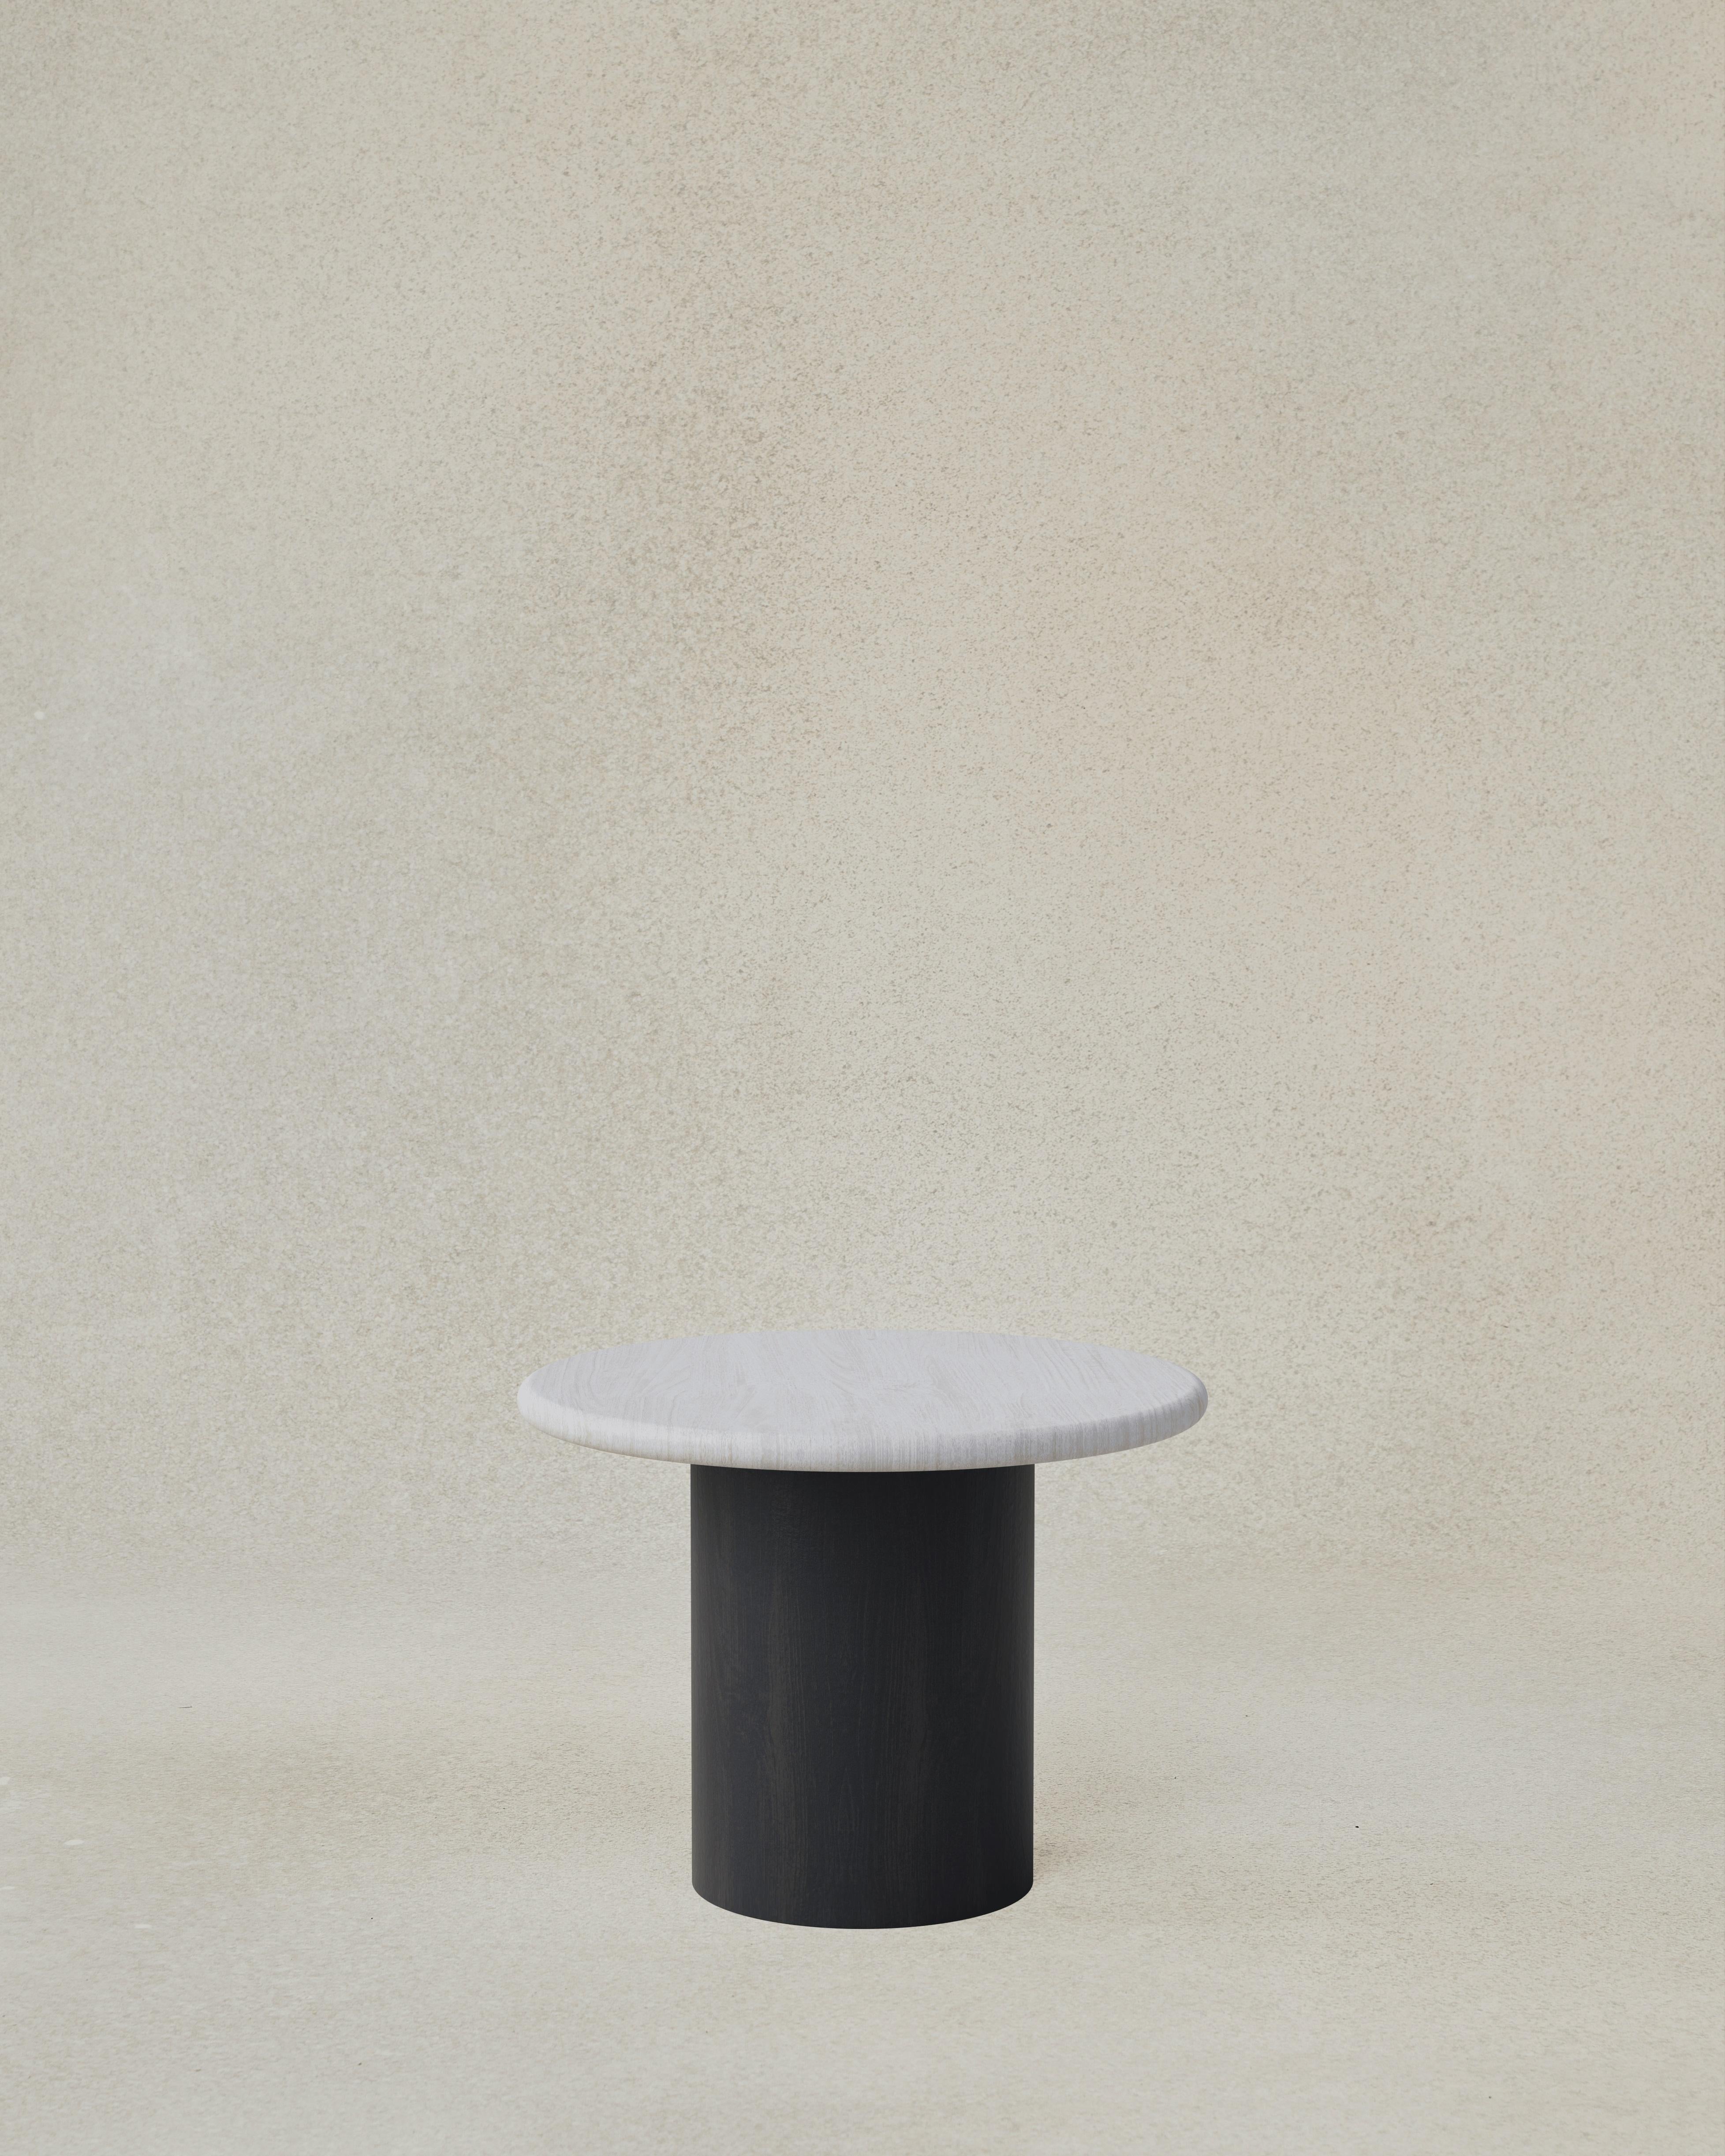 The Raindrop 500 is the largest Side Table we offer in the series can be paired with a 300 or 1000, or both! Now available in a range of finishes to suit any interior or style. The raindrops nestle together to form a cascading series of tables in